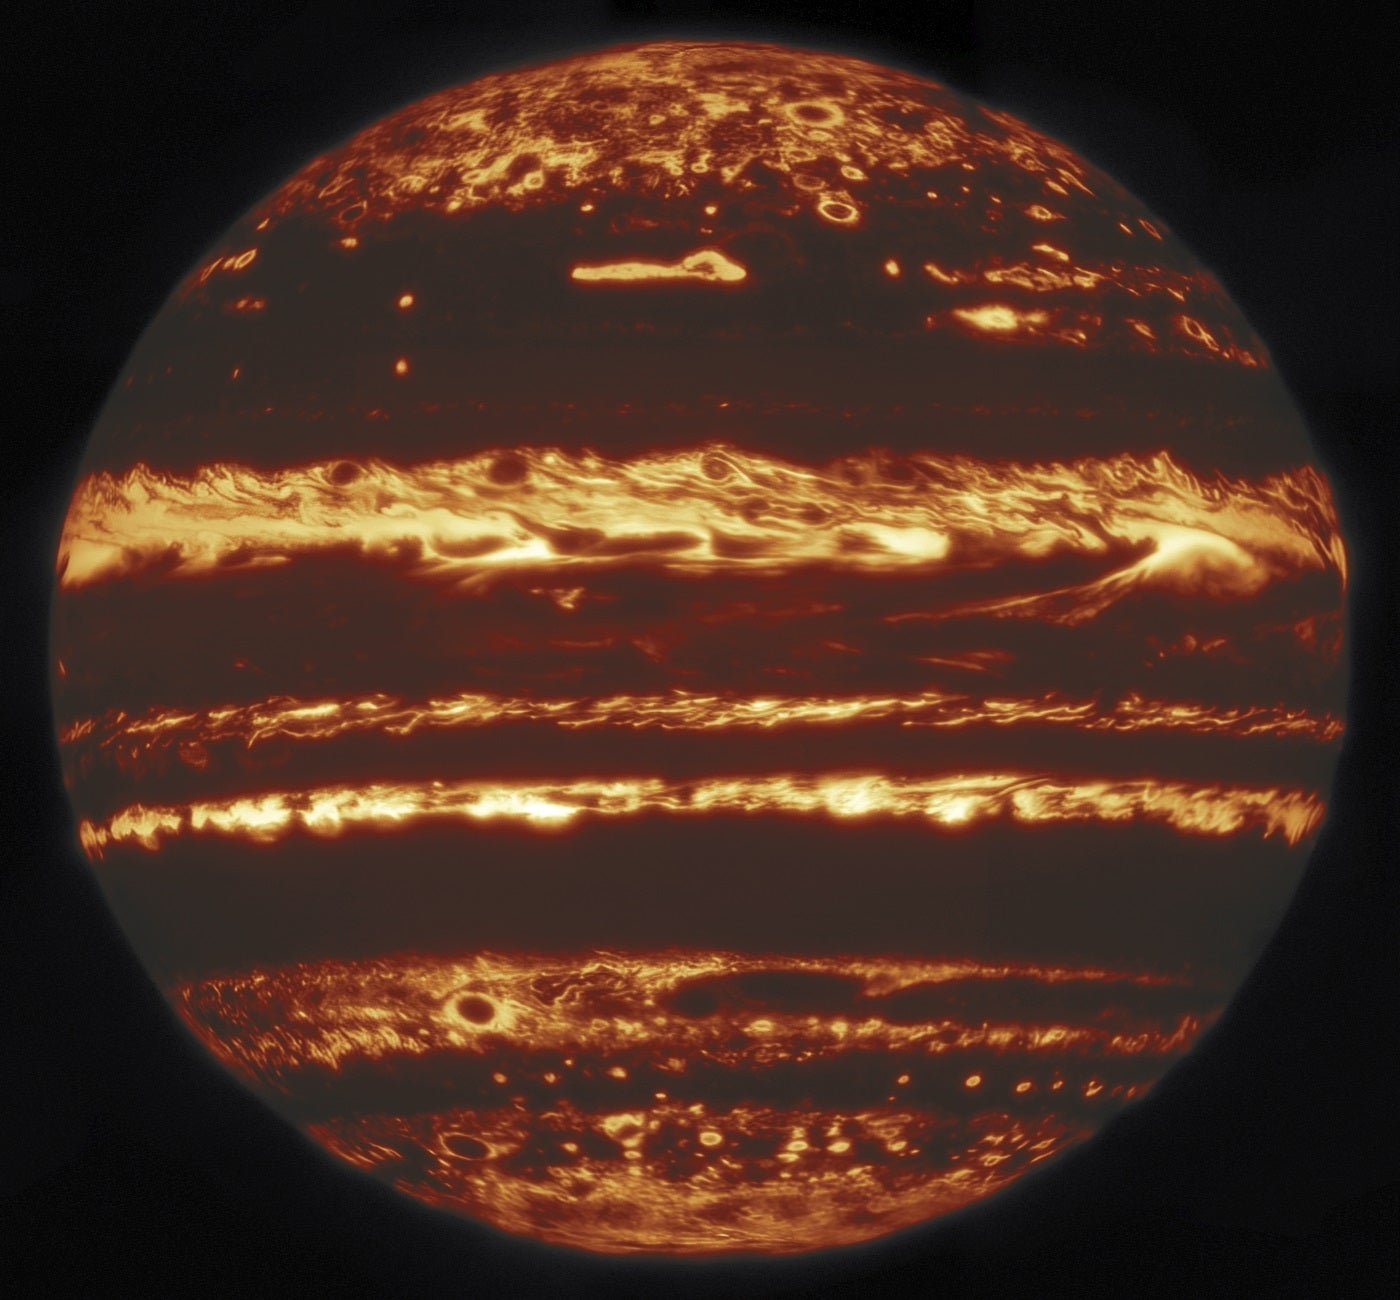 Jupiter has a spooky new look in this sharp infrared photo